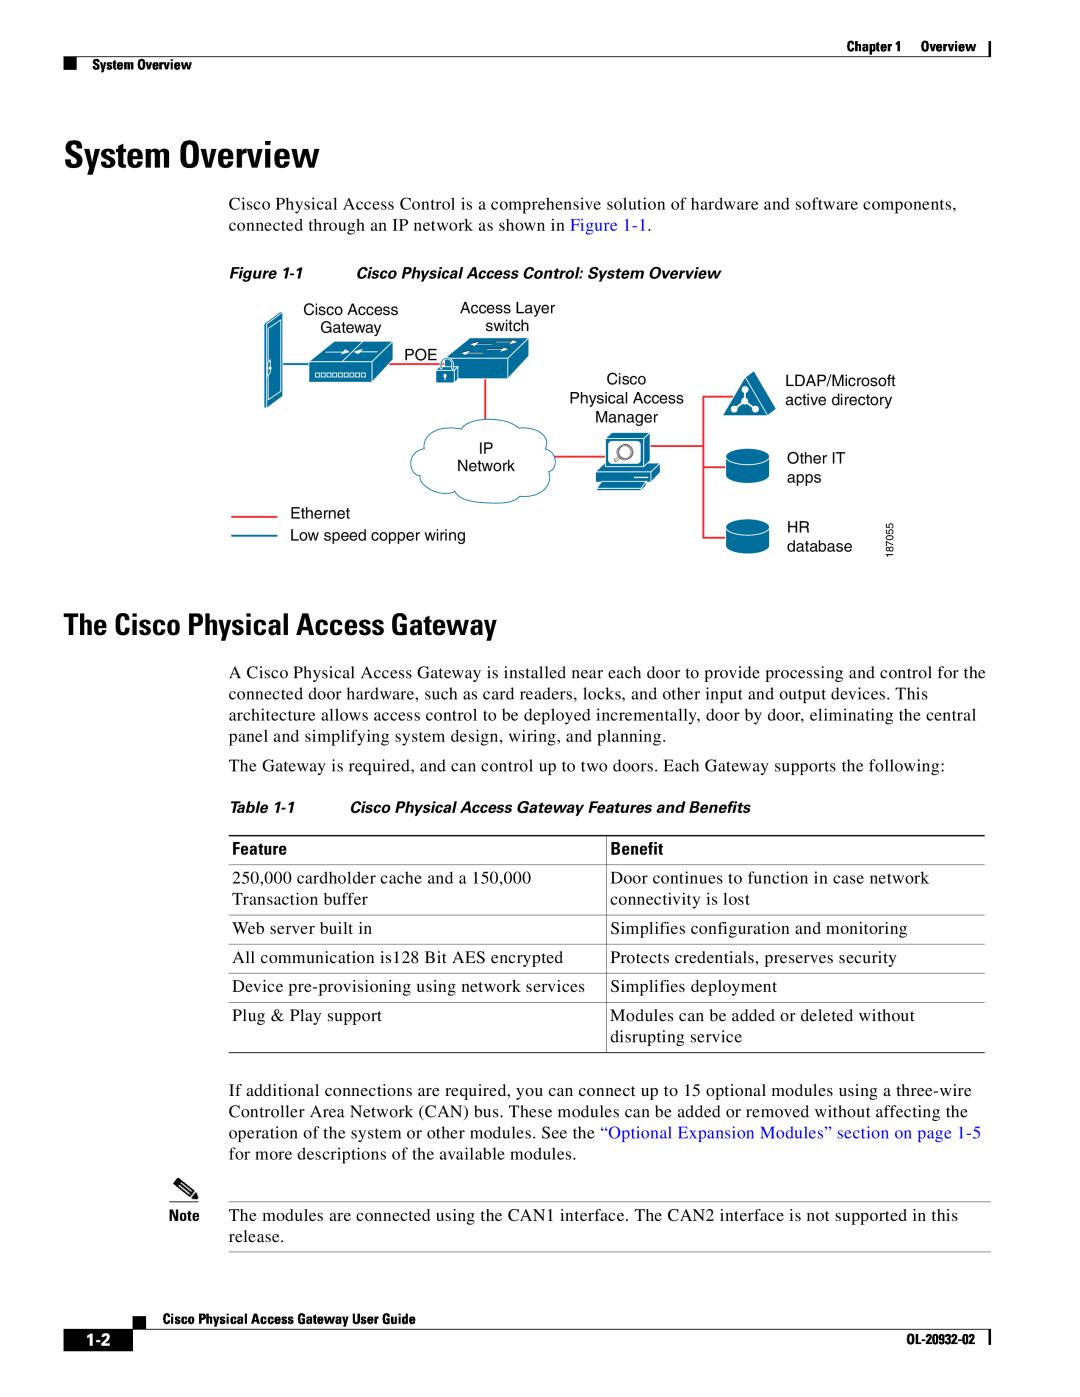 Cisco Systems OL-20932-02 manual System Overview, The Cisco Physical Access Gateway 